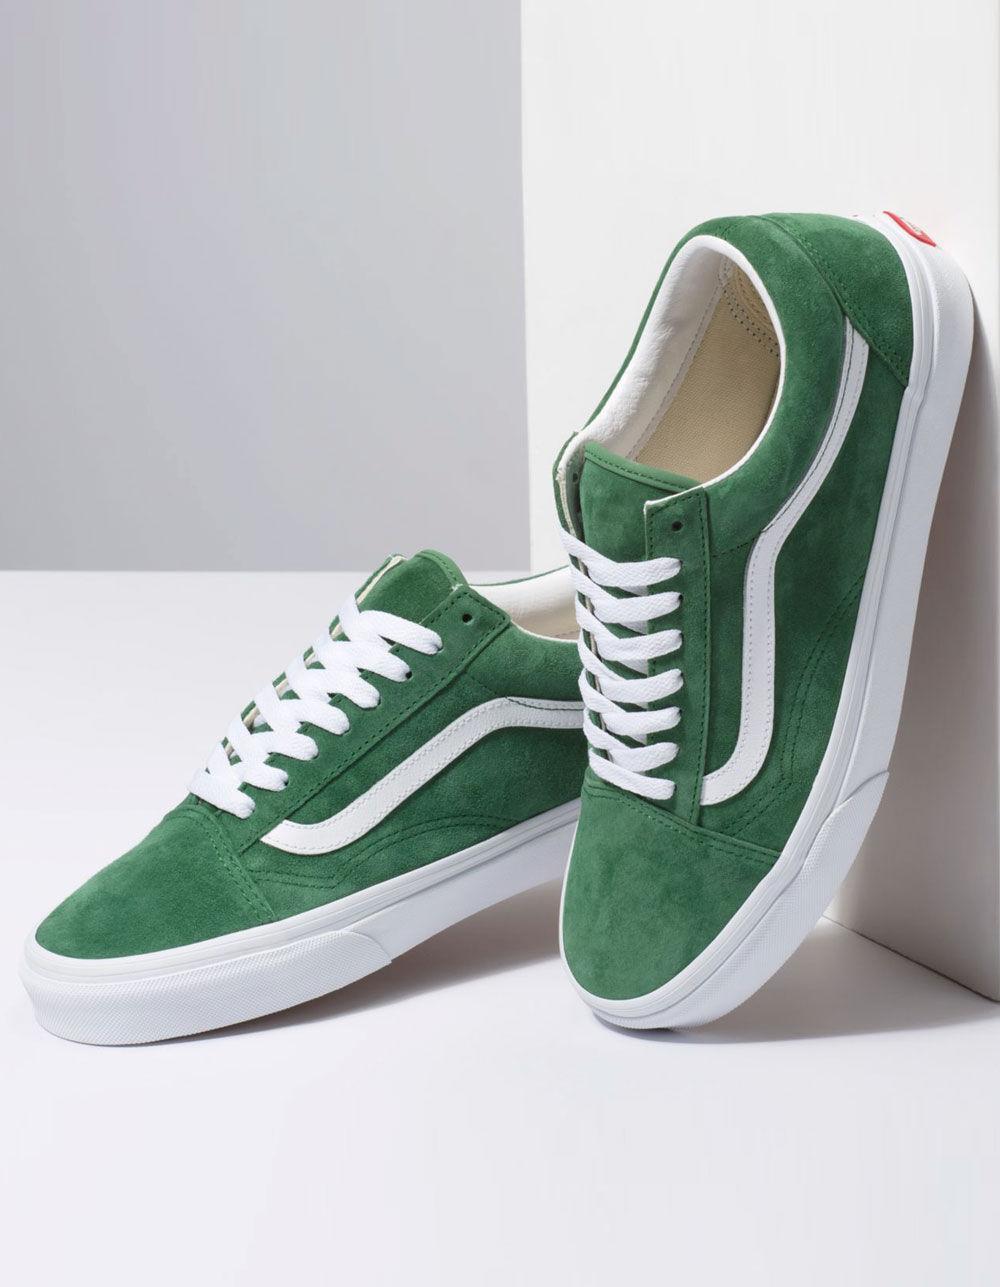 Vans Canvas Old Skool Deep Grass Green & Off White Shoes - Lyst